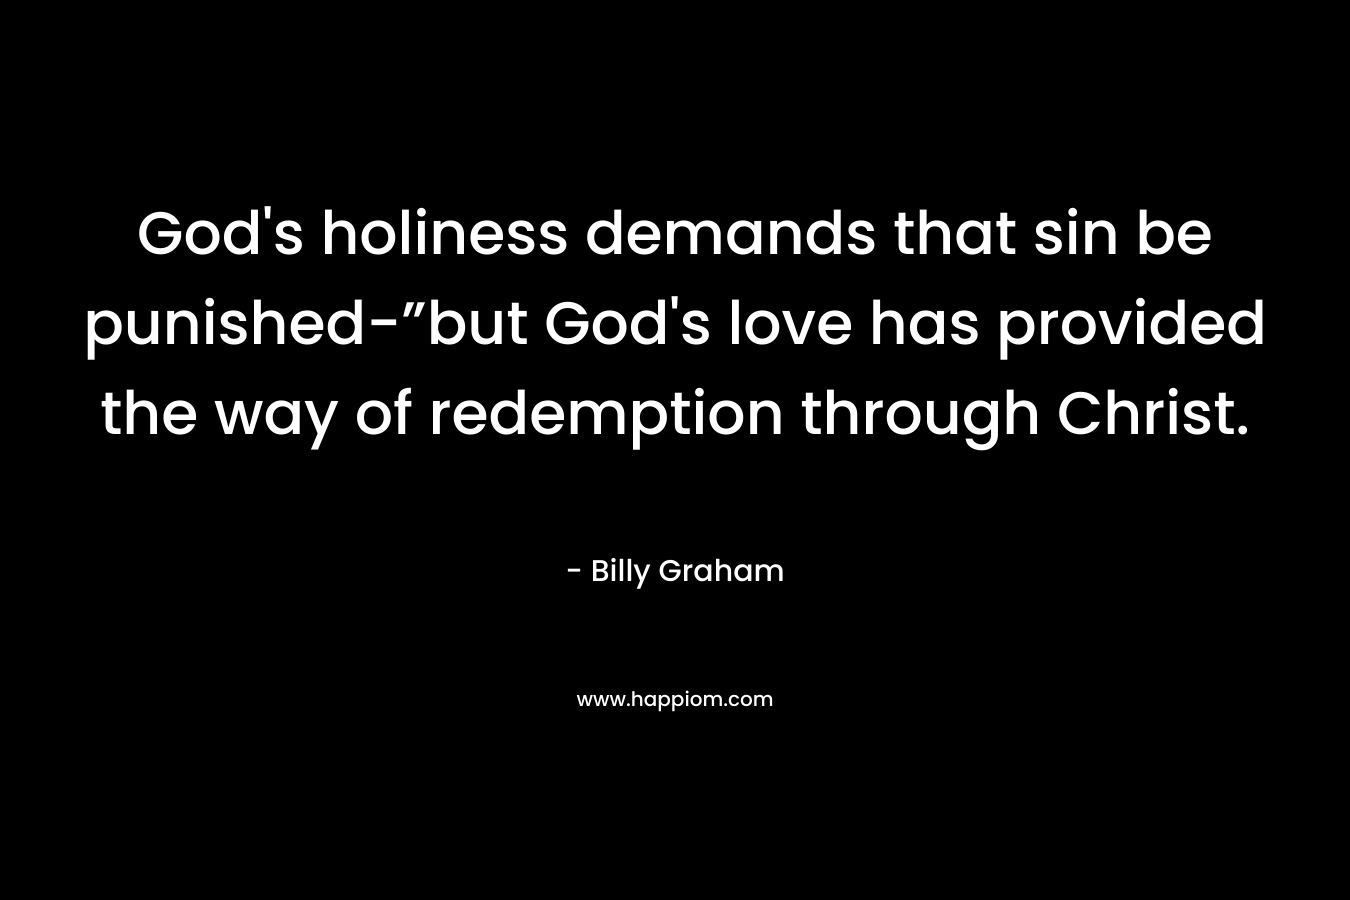 God's holiness demands that sin be punished-”but God's love has provided the way of redemption through Christ.